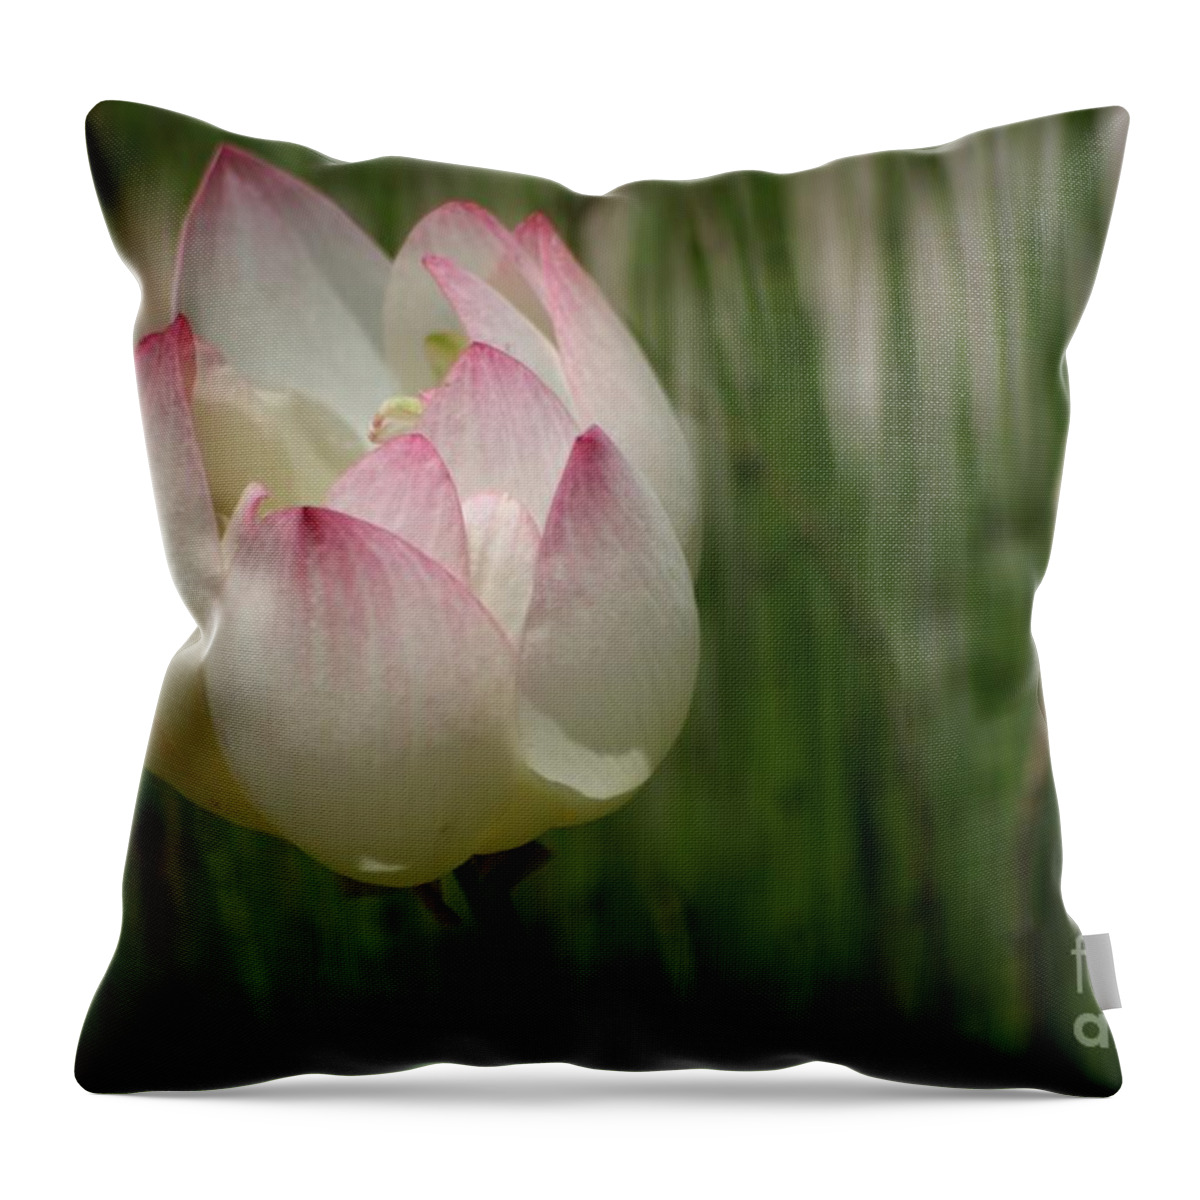 Flower Throw Pillow featuring the photograph A Touch Of Blush by Living Color Photography Lorraine Lynch